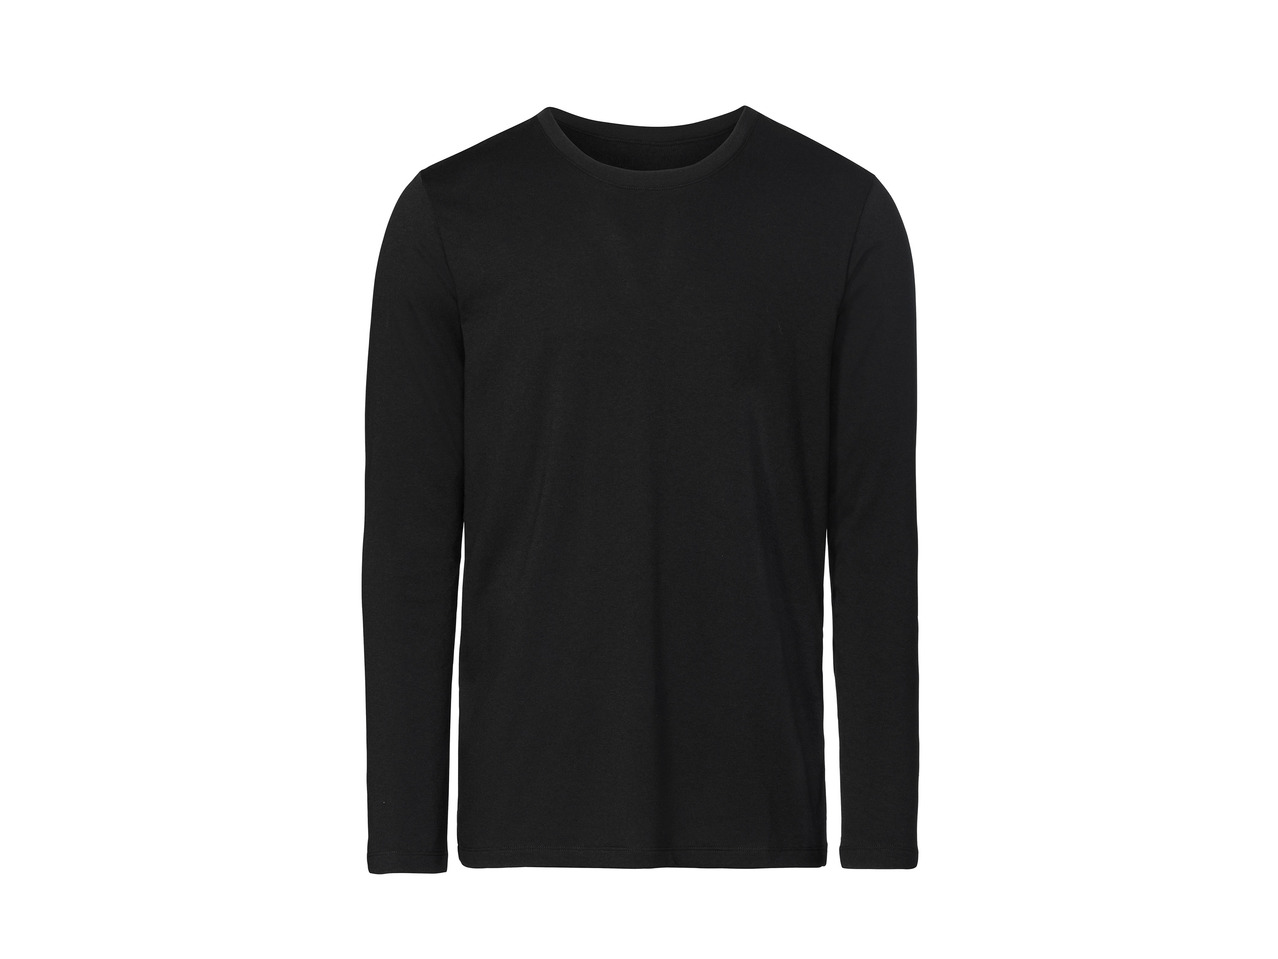 Livergy Men's Thermal Long Sleeve Top1